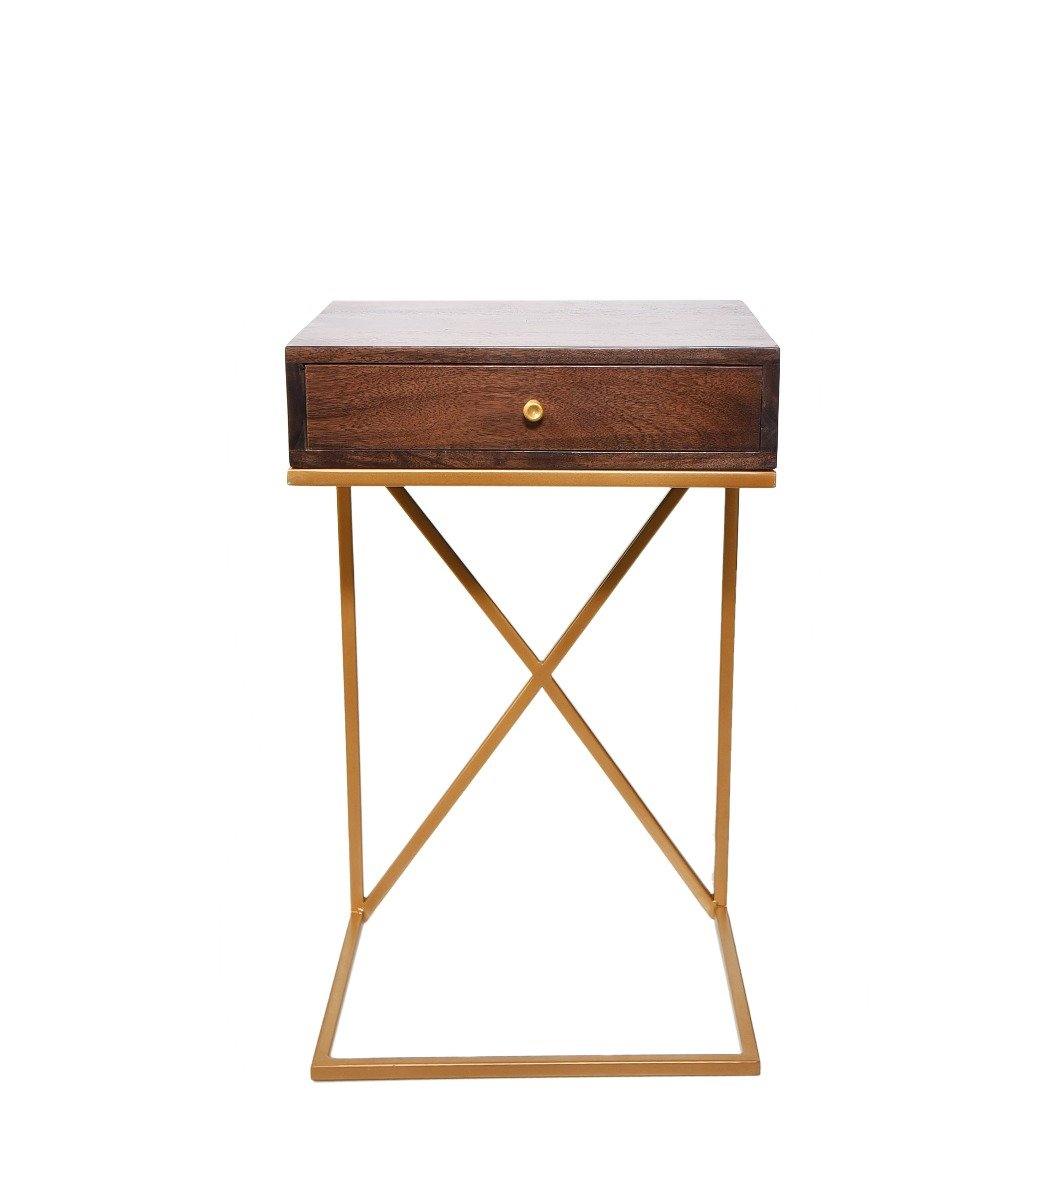 Solid Acacia Wood Iron Base Side End Table with 1 Drawer - YoTreasure